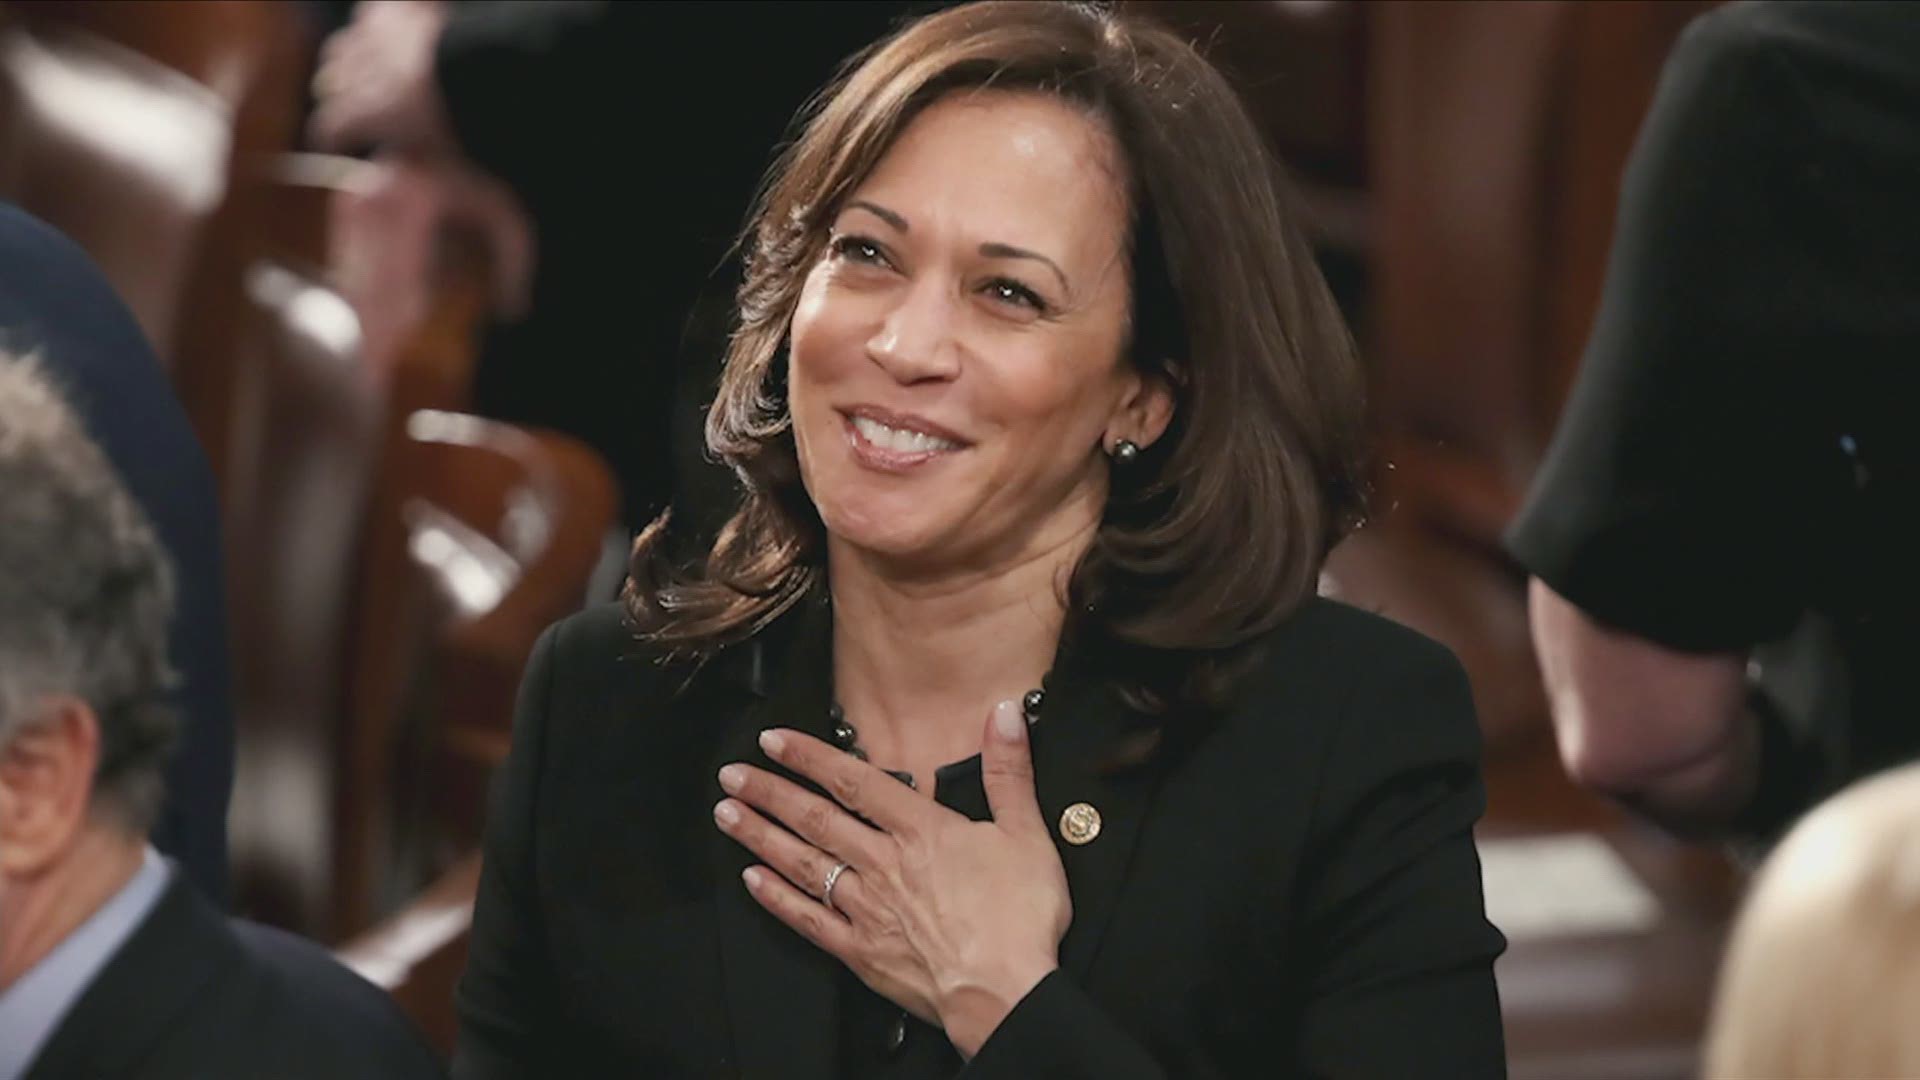 Maya Harris, Meena Harris, and Ella Emhoff tell about their lives with Sen. Kamala Harris, the Democratic vice presidential nominee.